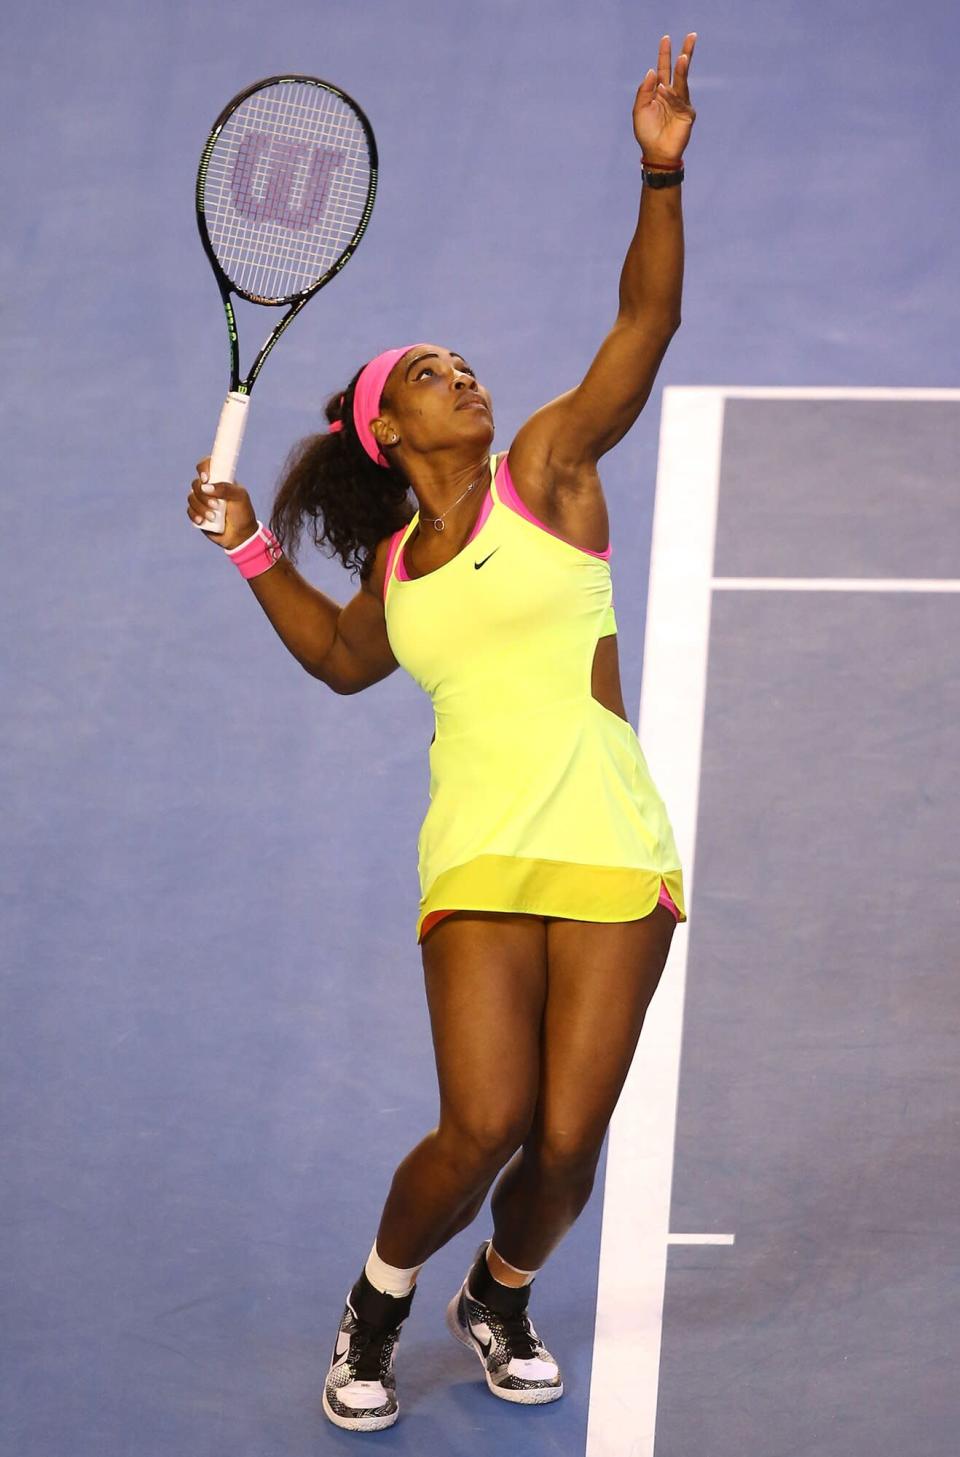 Serena Williams of the United States serves in her women's final match against Maria Sharapova of Russia during day 13 of the 2015 Australian Open at Melbourne Park on January 31, 2015 in Melbourne, Australia